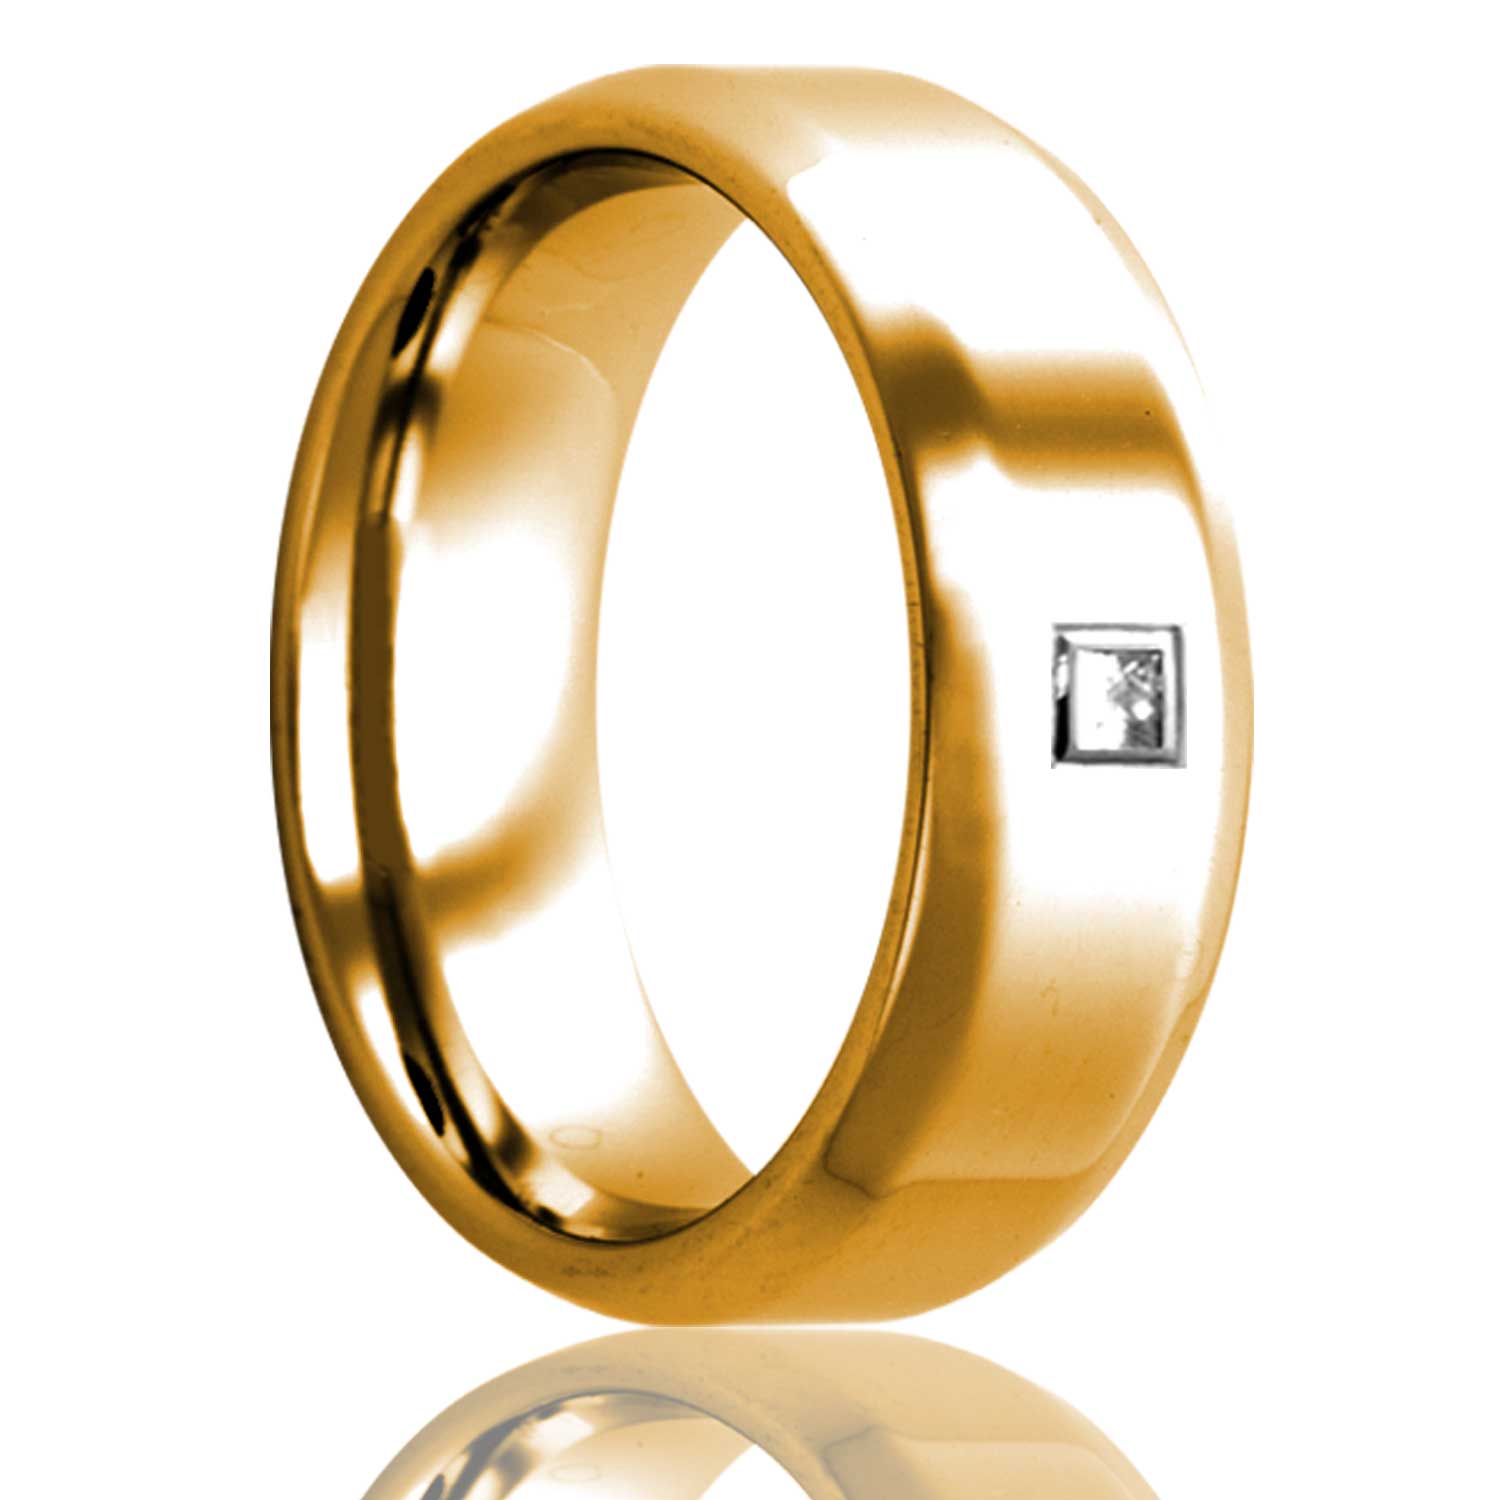 A 14k gold wedding band with square diamond & beveled edges displayed on a neutral white background.